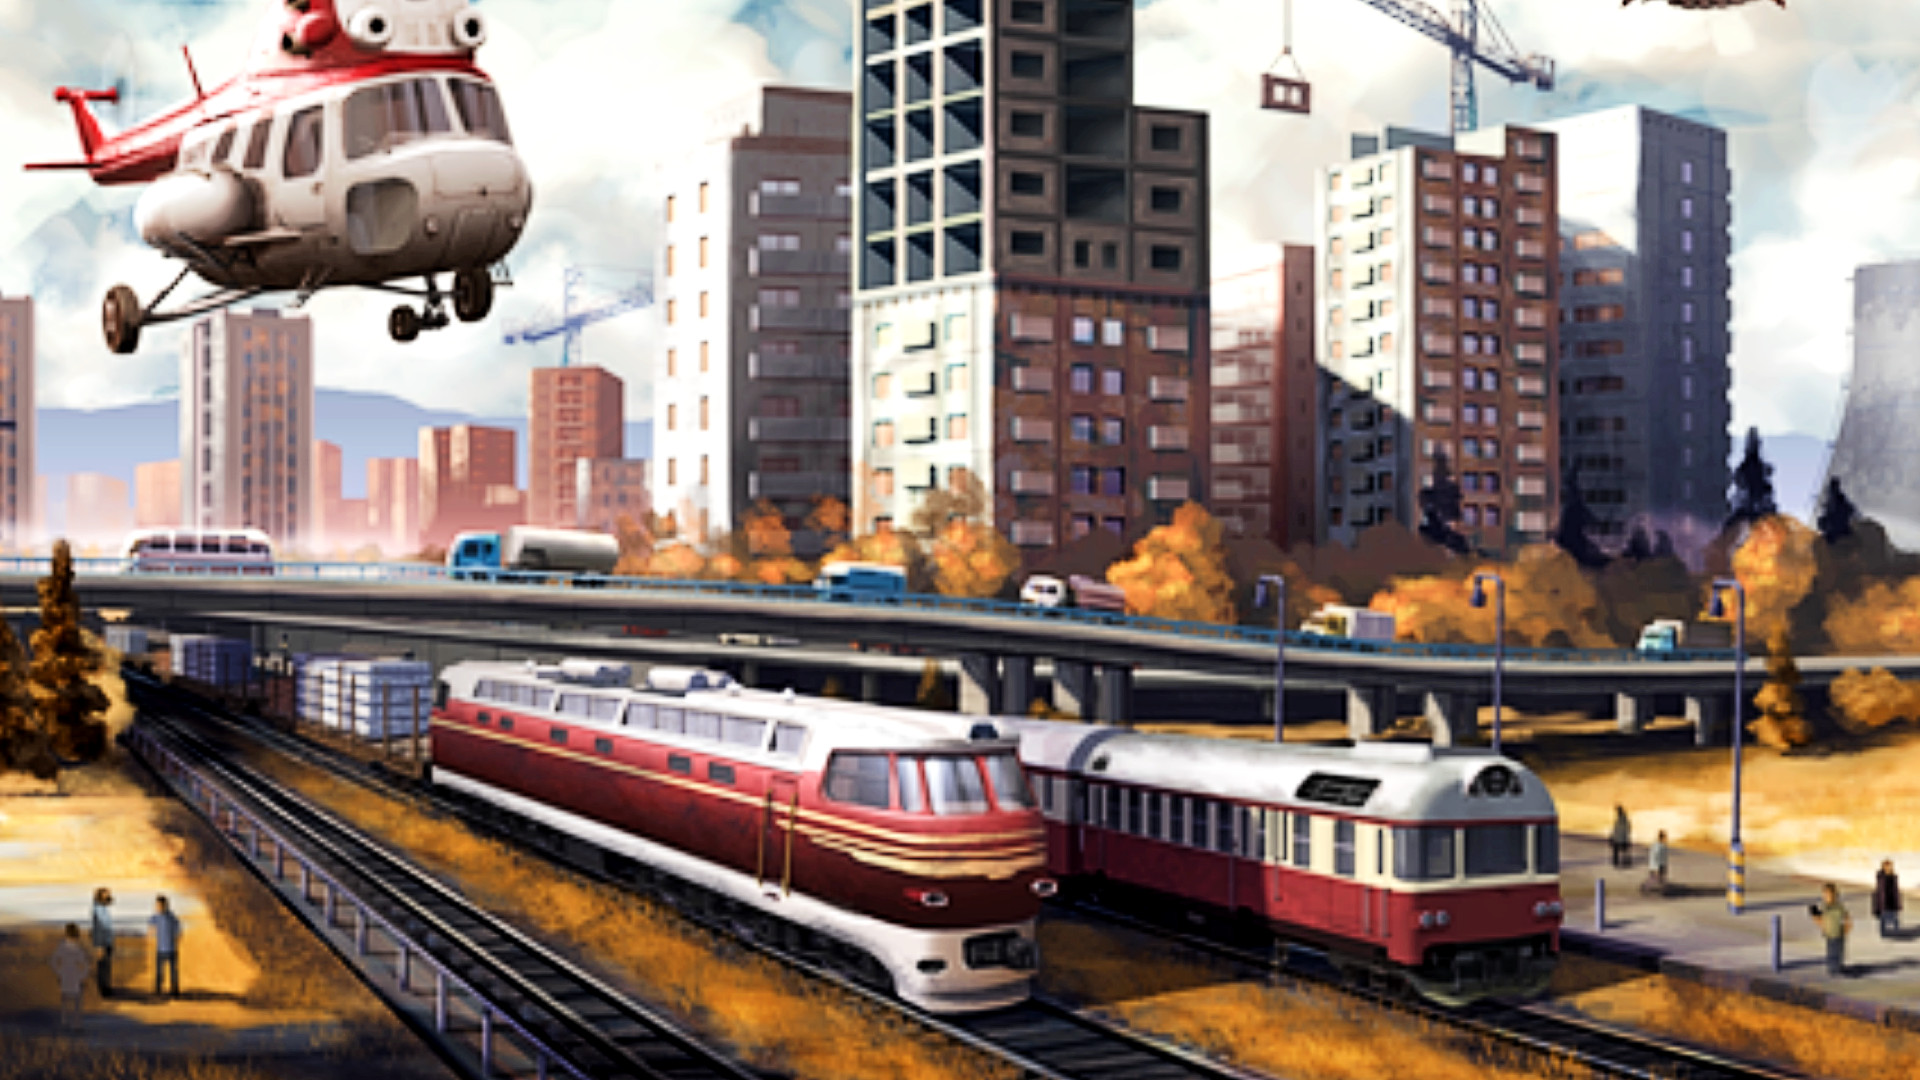 9/10 Soviet city builder introduces campaign mode in big free update